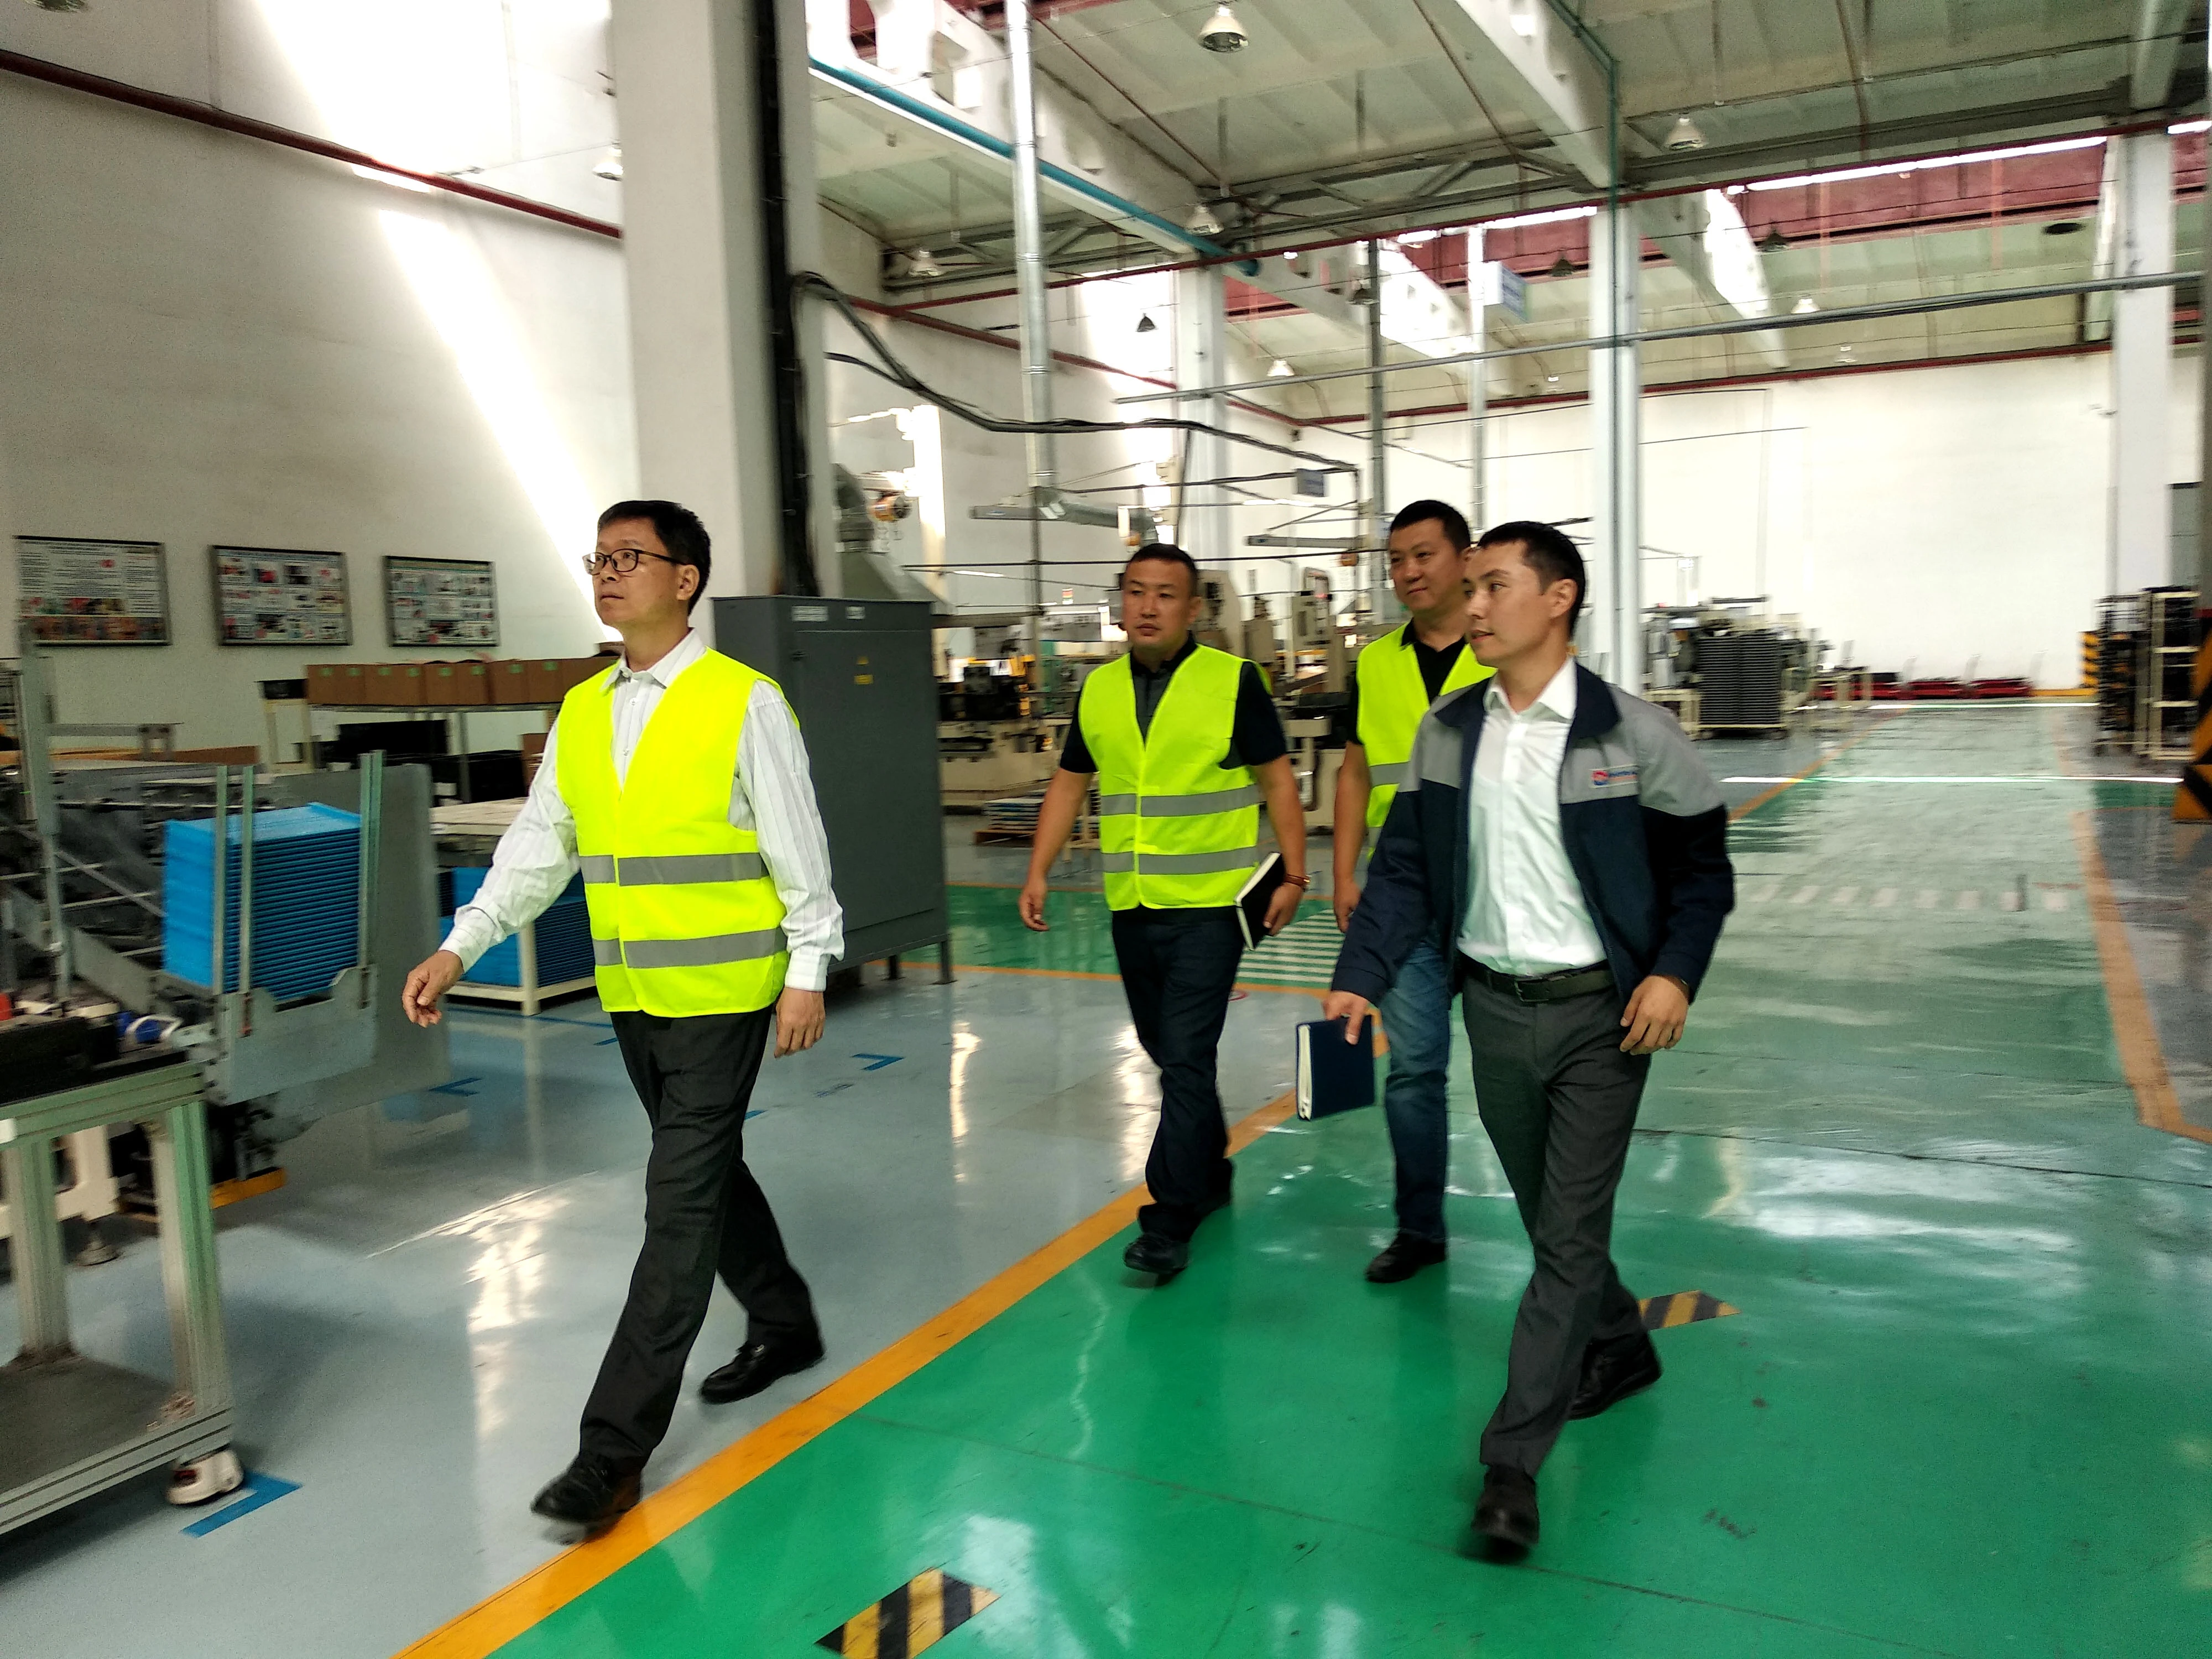 ON SEPTEMBER 4, THE DIRECTOR OF THE SALES DIRECTORATE OF GREE ELECTRIC APPLIANCES INC. VISITED OUR COMPANY.